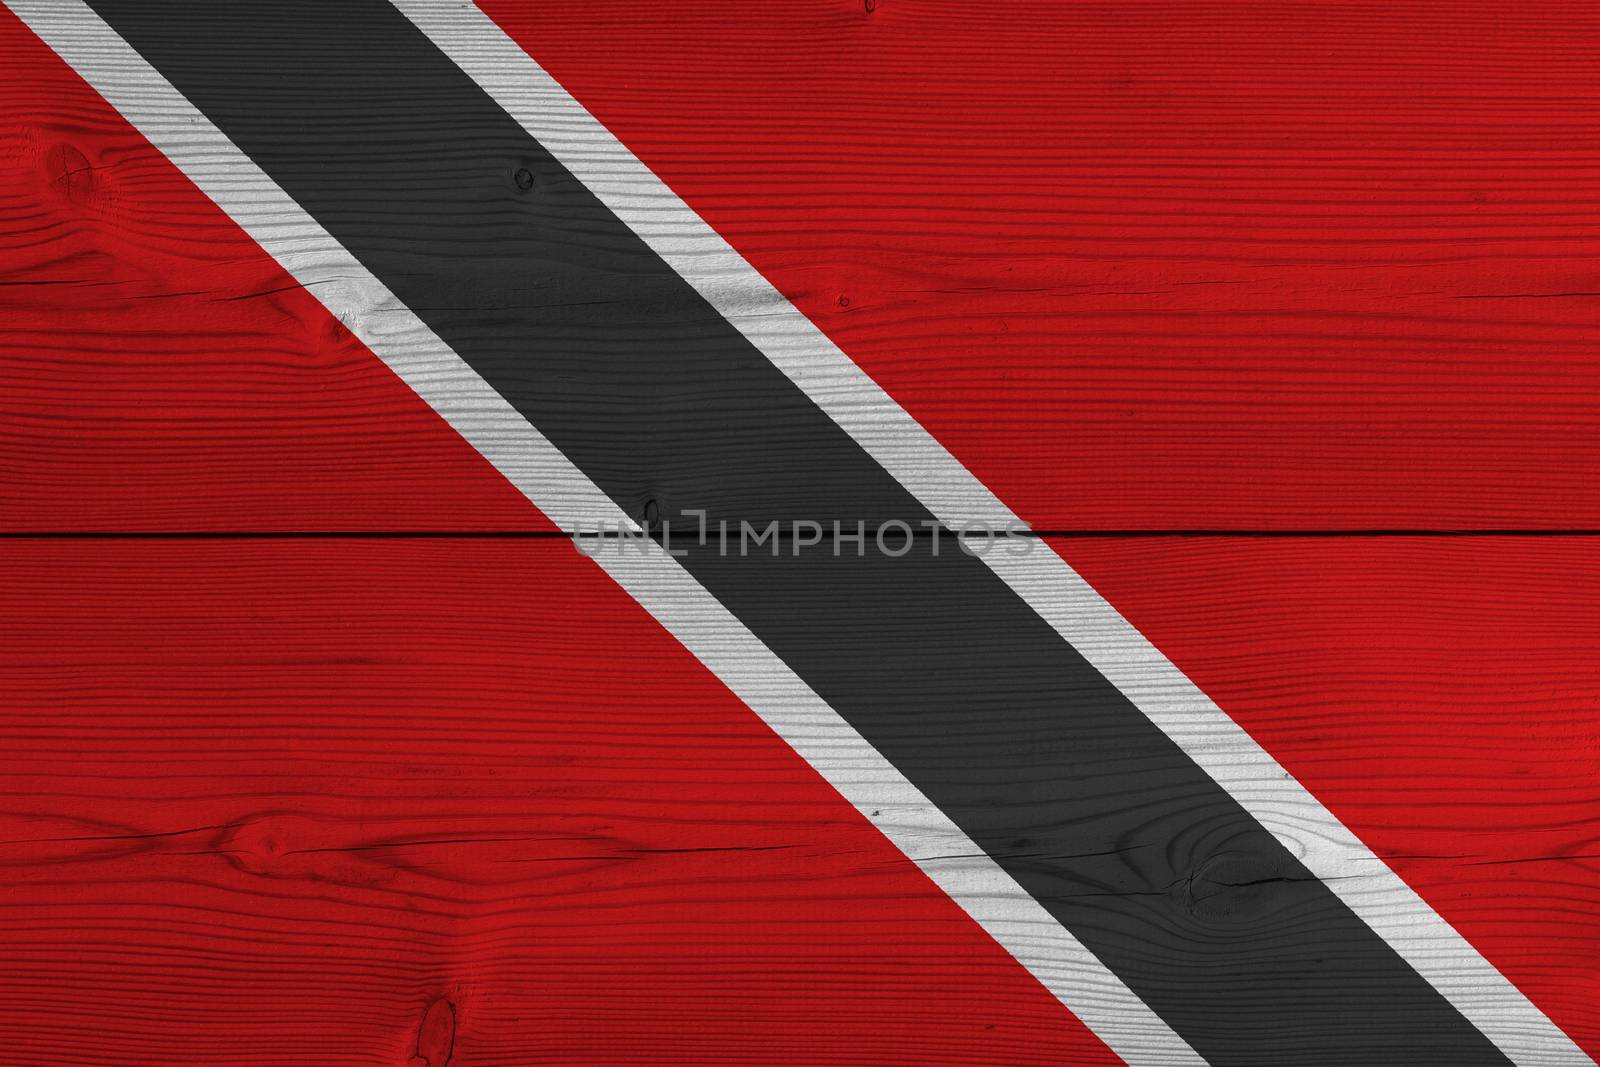 Trinidad and Tobago flag painted on old wood plank. Patriotic background. National flag of Trinidad and Tobago